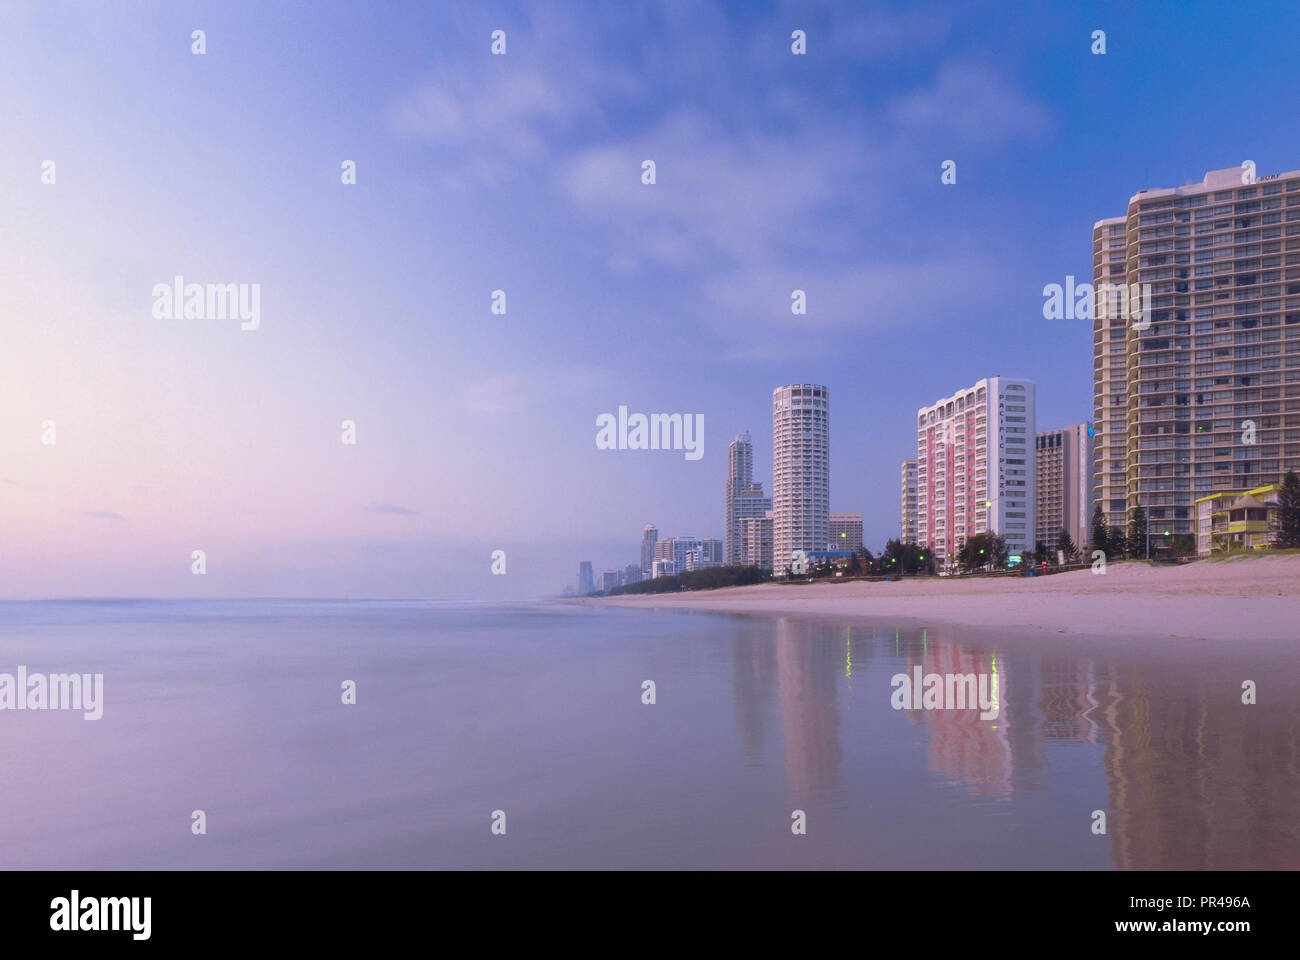 Skyscrapers along an empty Surfer's Paradise beach, Queensland, Australia, at dawn Stock Photo